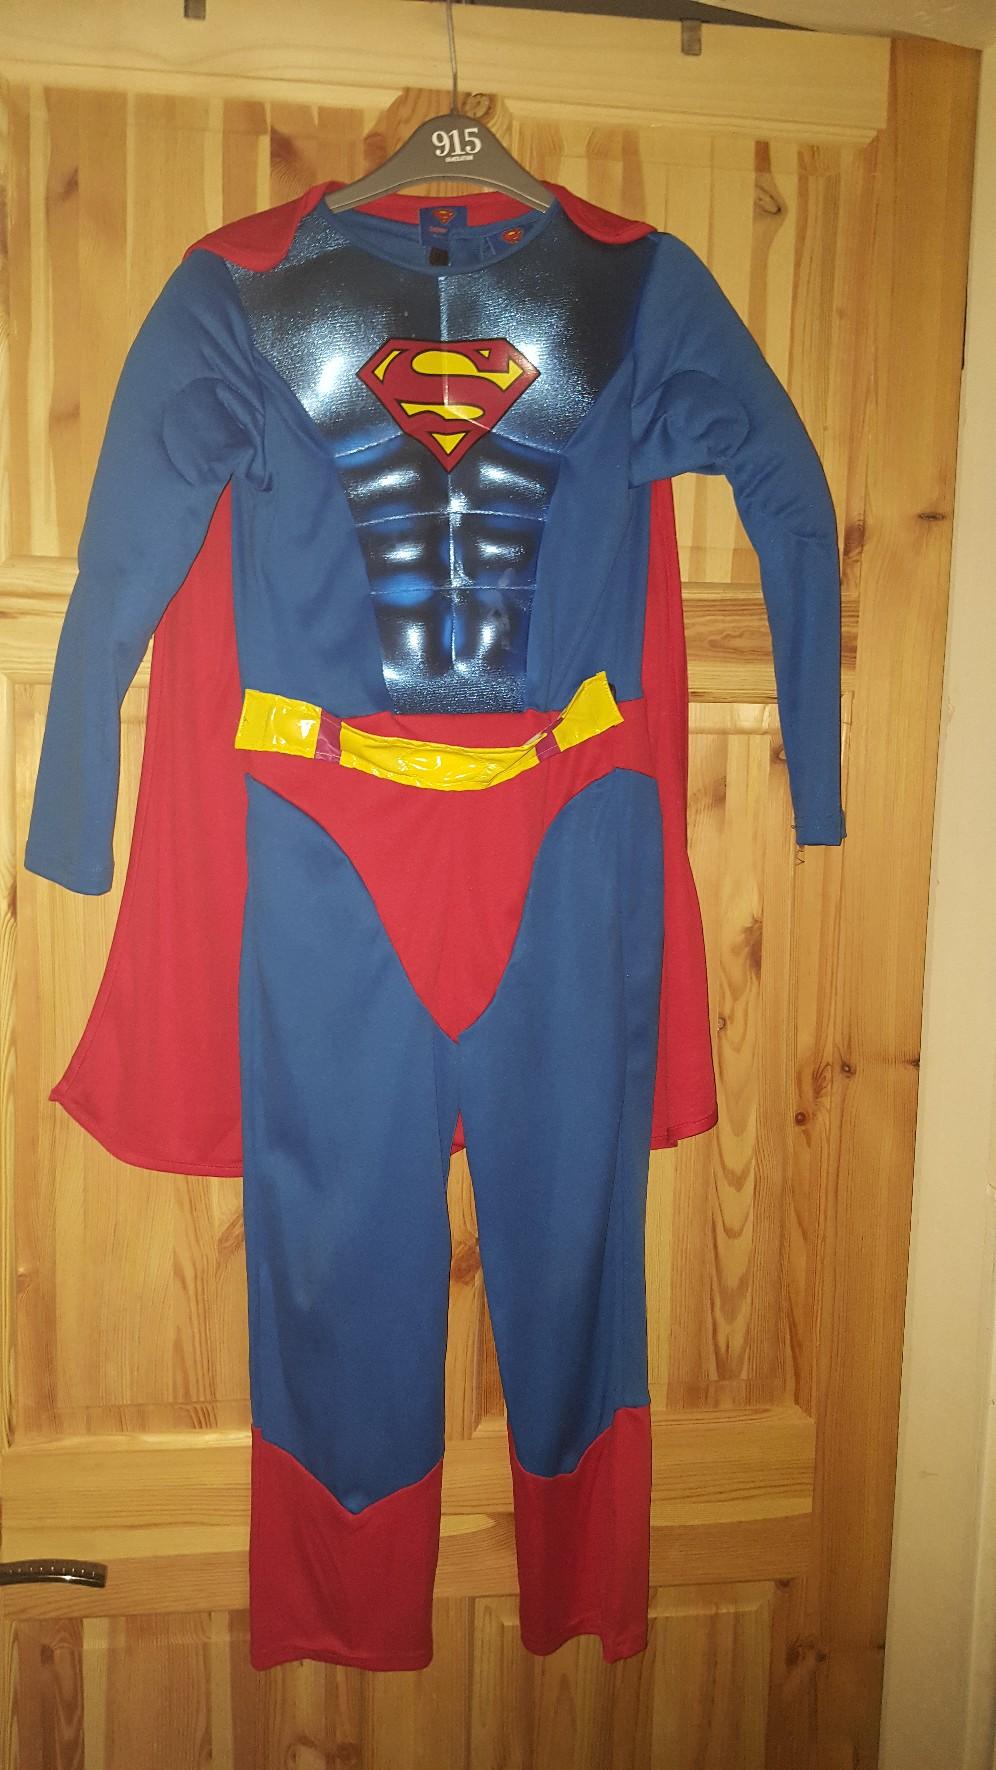 Superman costume fancy dress age 7-8 in S65 Rotherham for £6.00 for ...